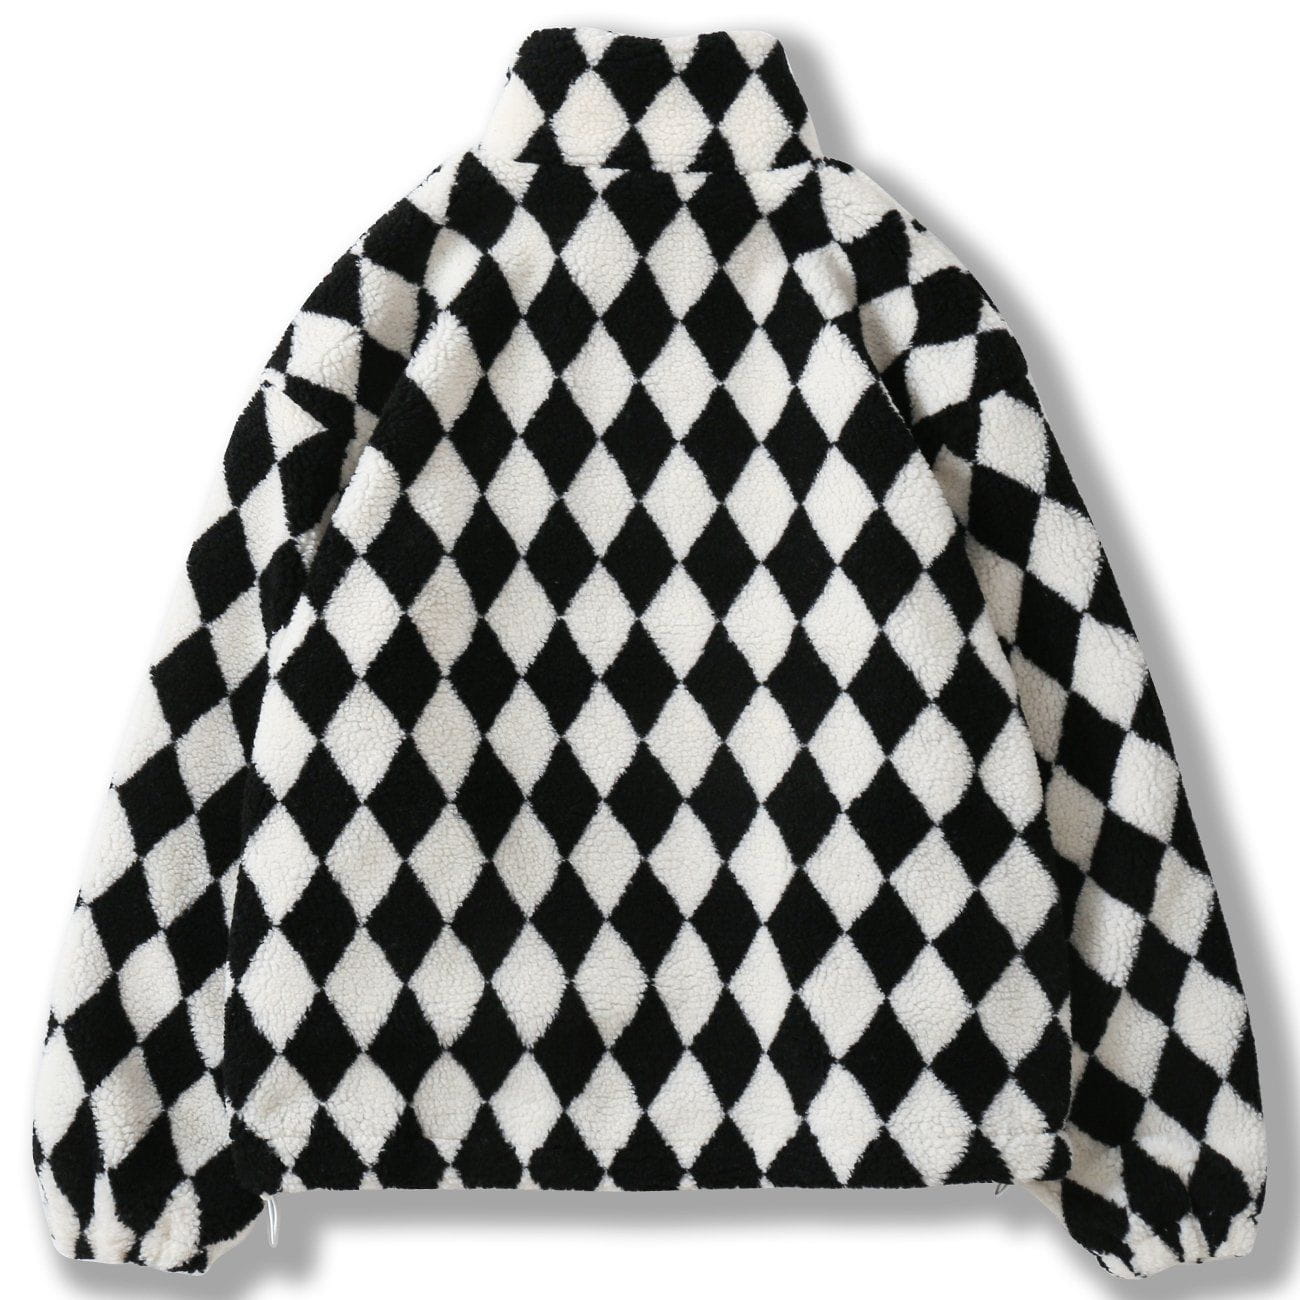 LUXENFY™ - Black and White Checkerboard Sherpa Jacket luxenfy.com